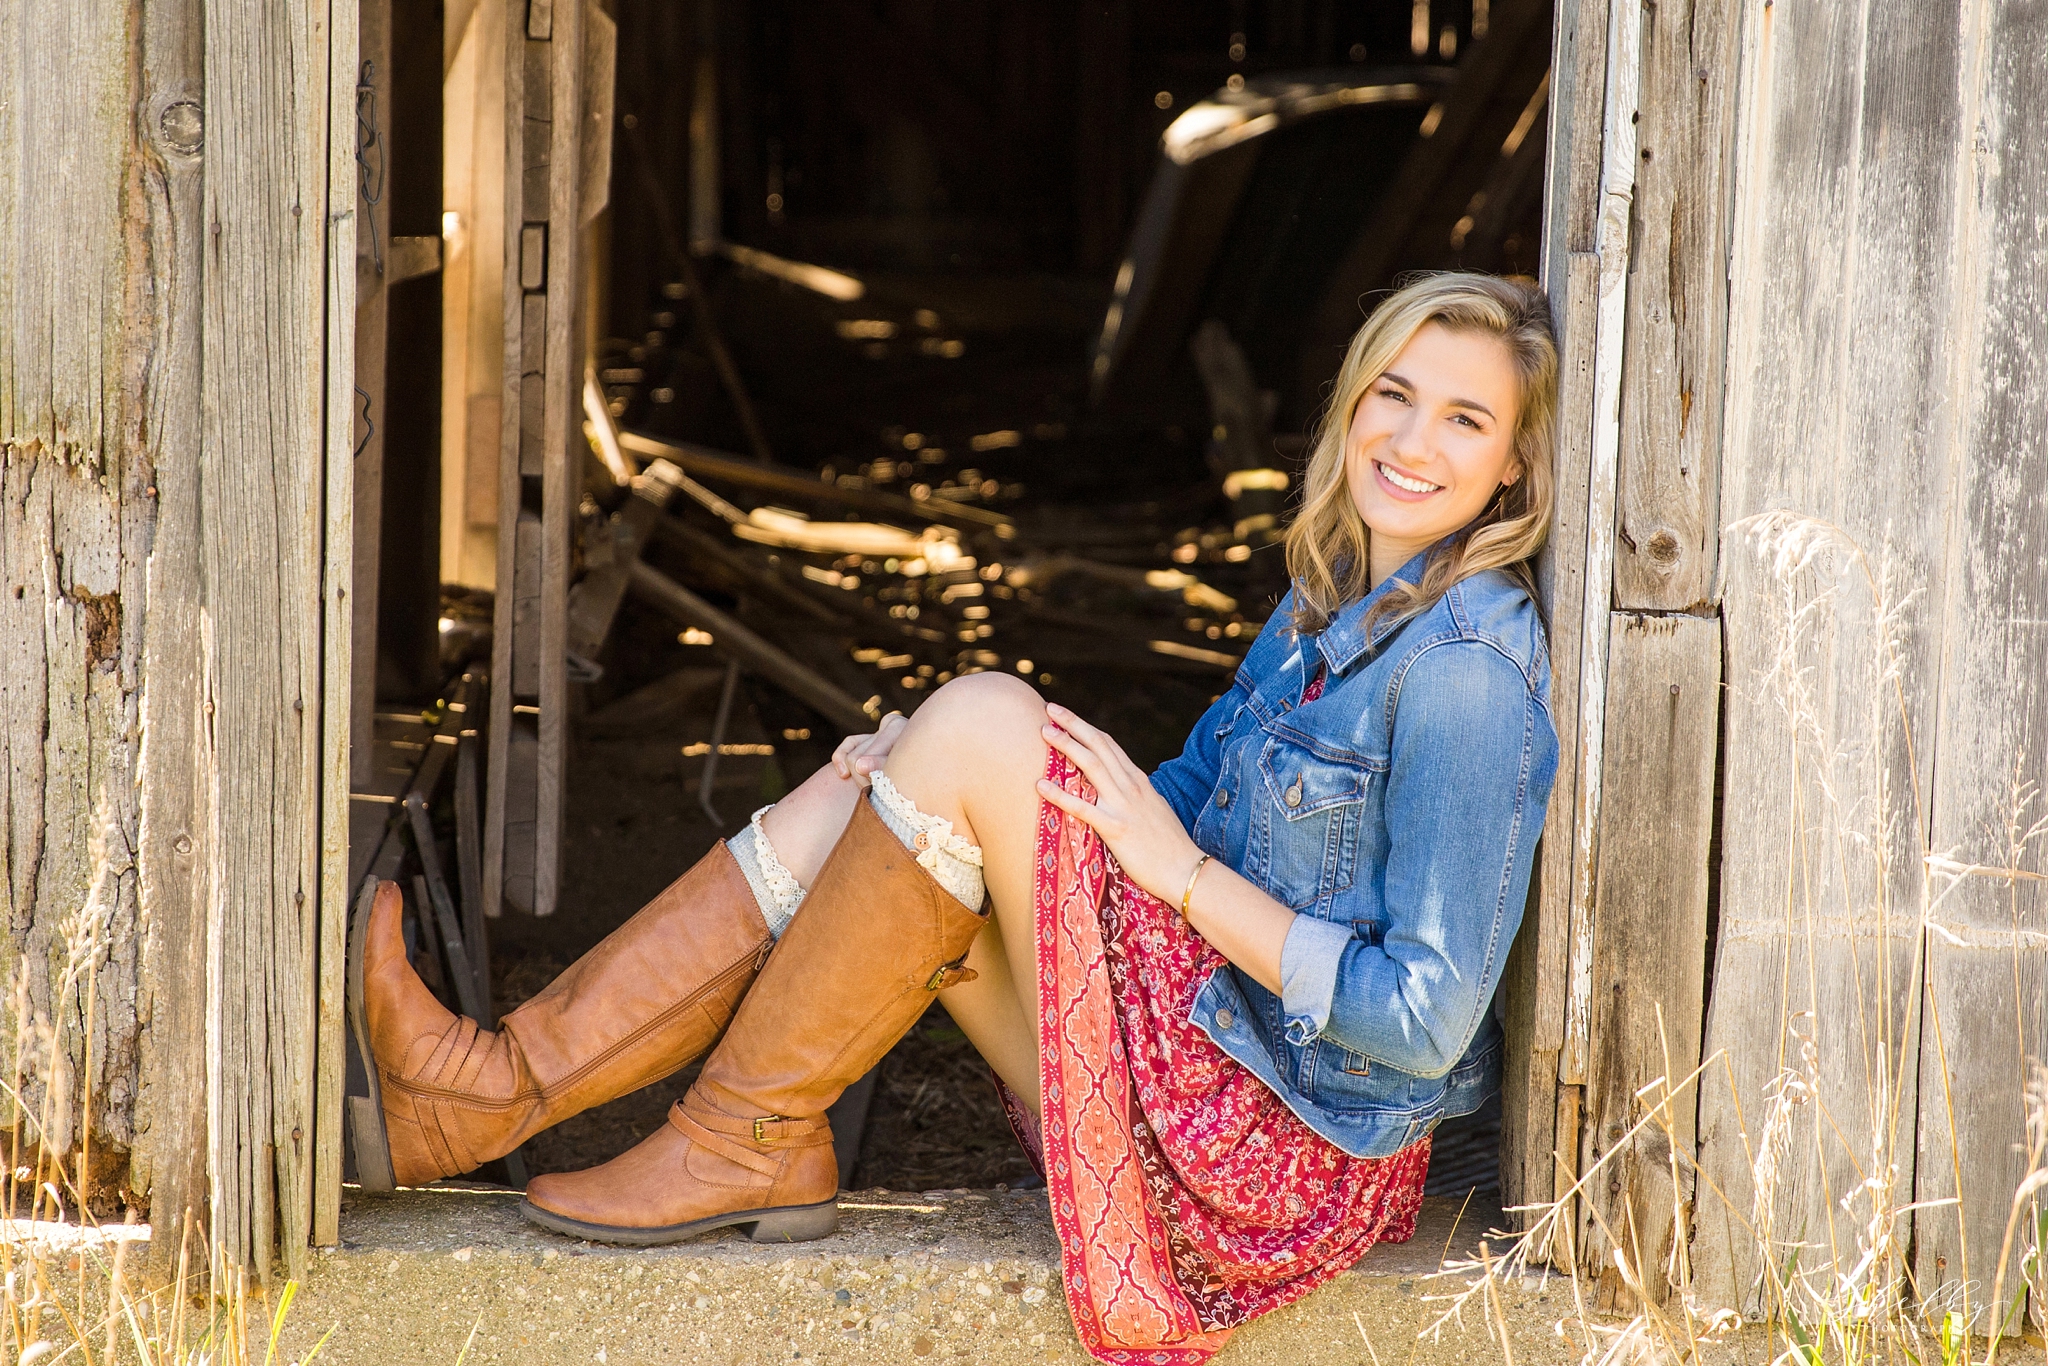 Kylie Swanson | Illinois Valley Central High School | Class of 2019 senior pictures ...2048 x 1366